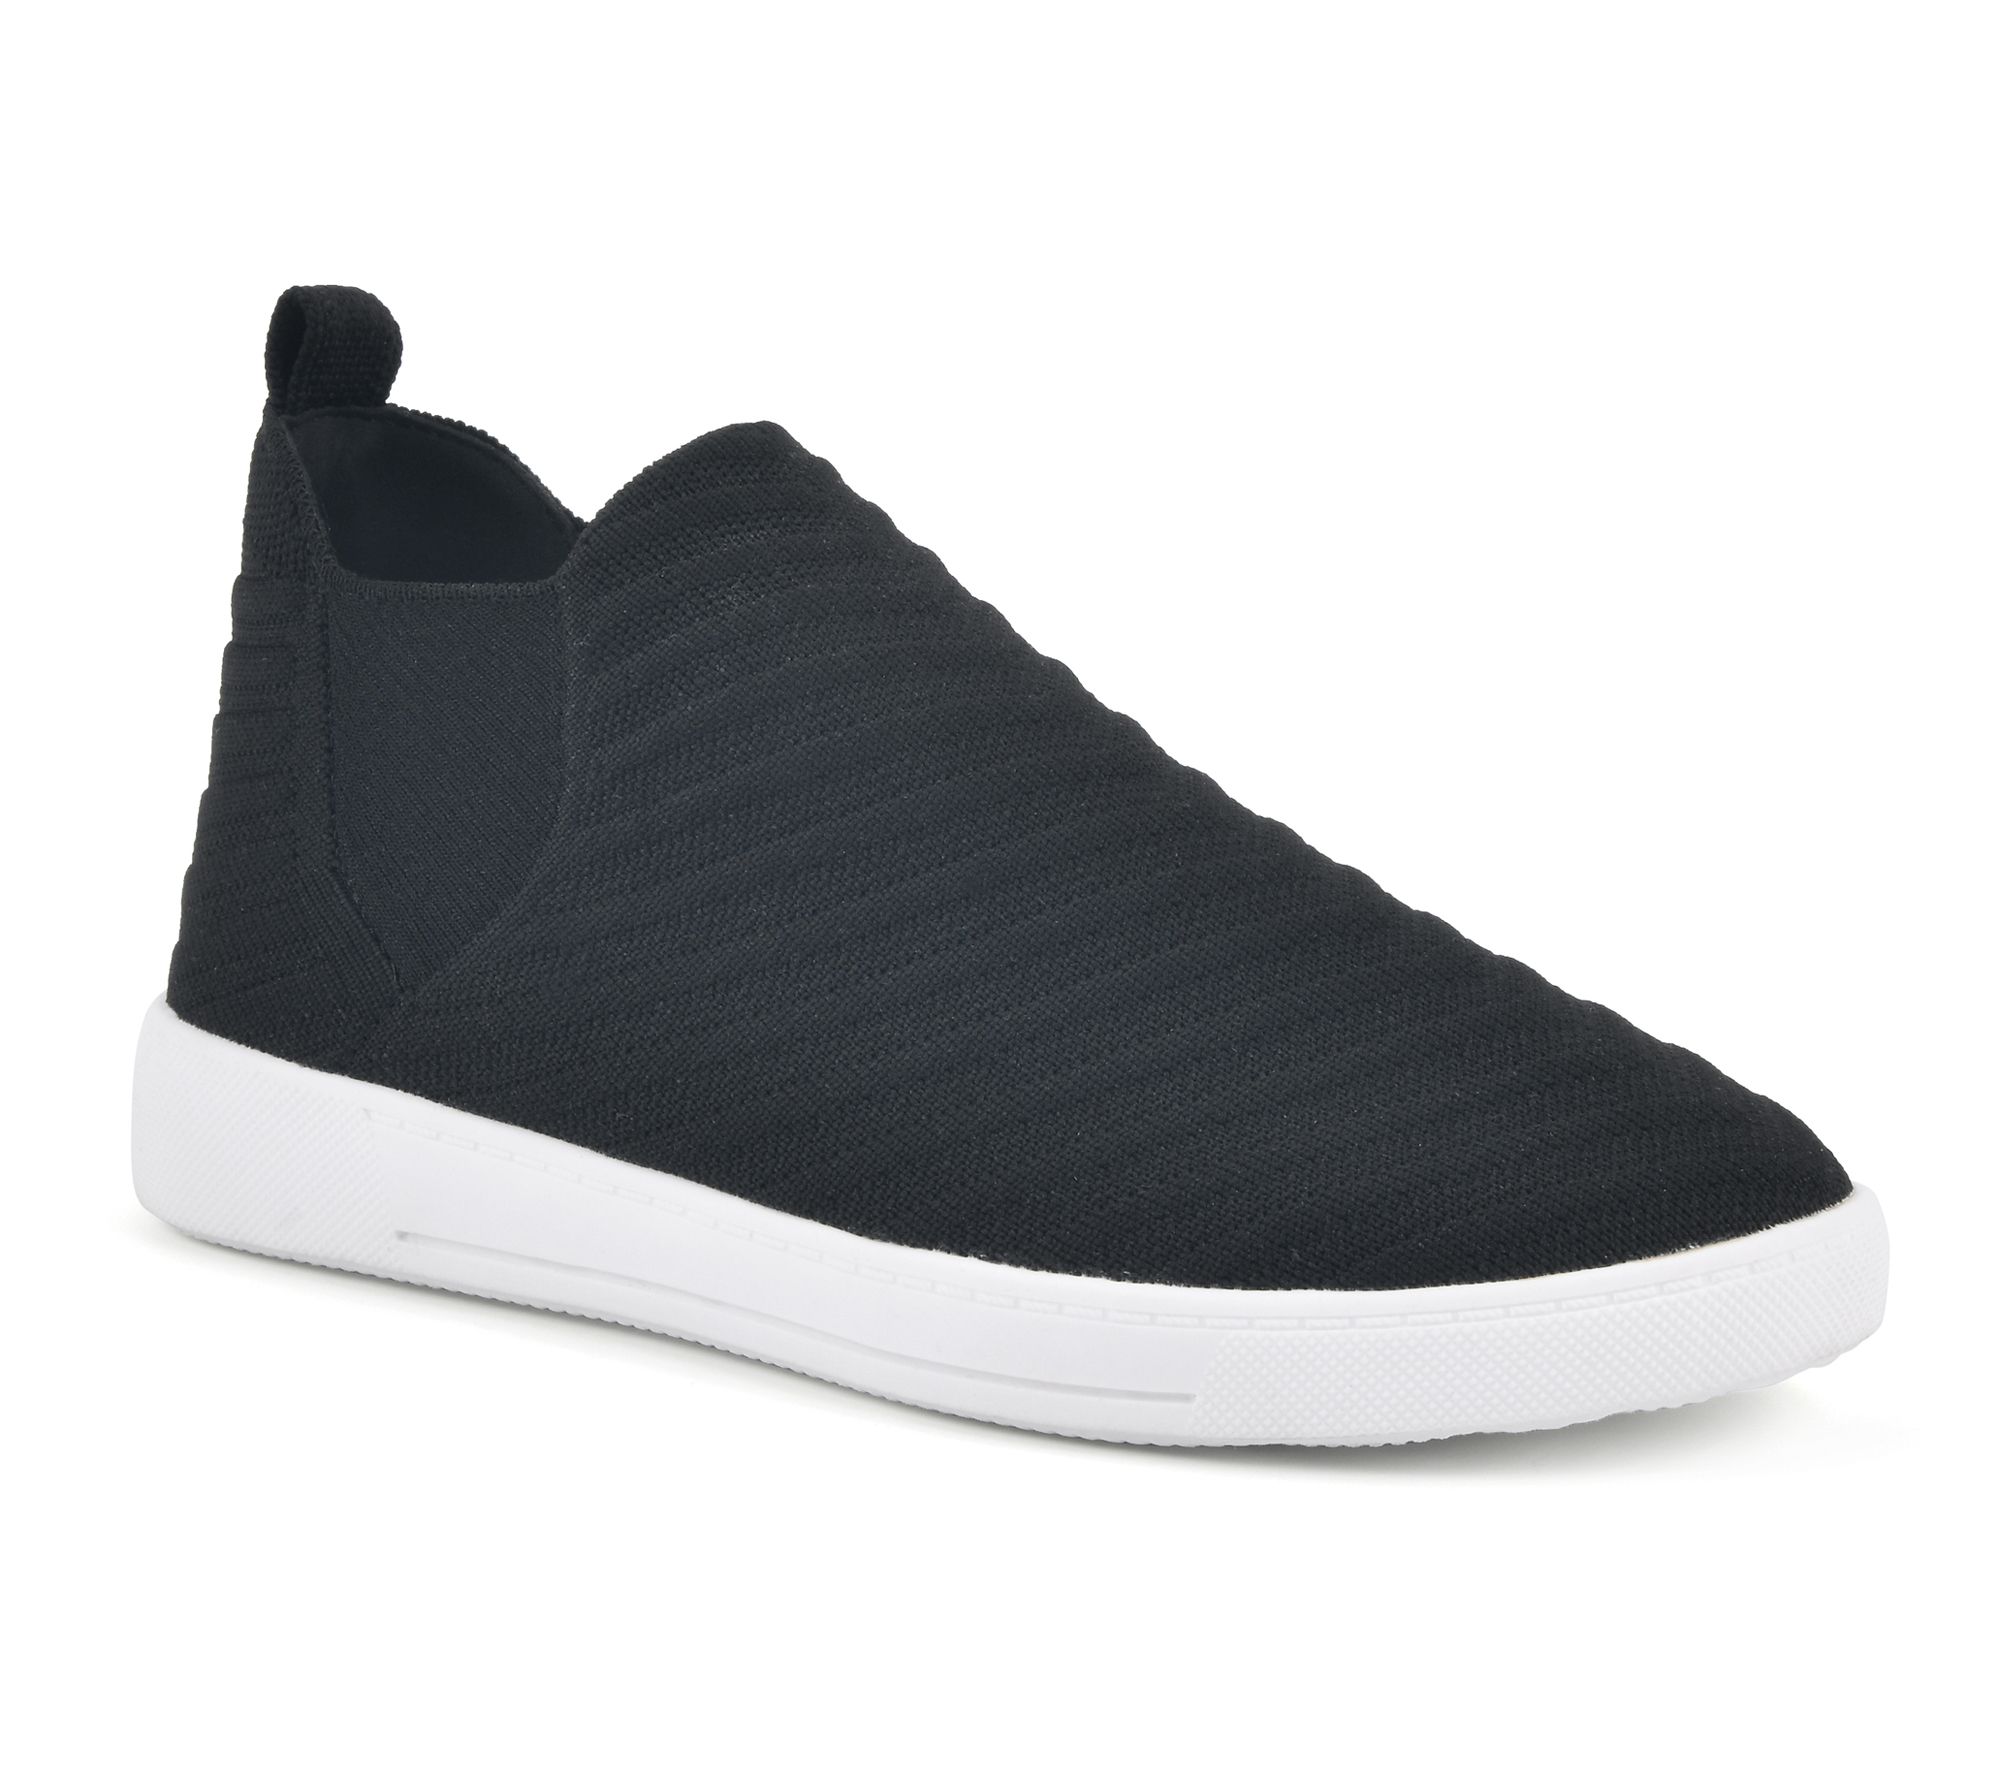 White Mountain High-top Slip-on Sneakers - Uplifting - QVC.com